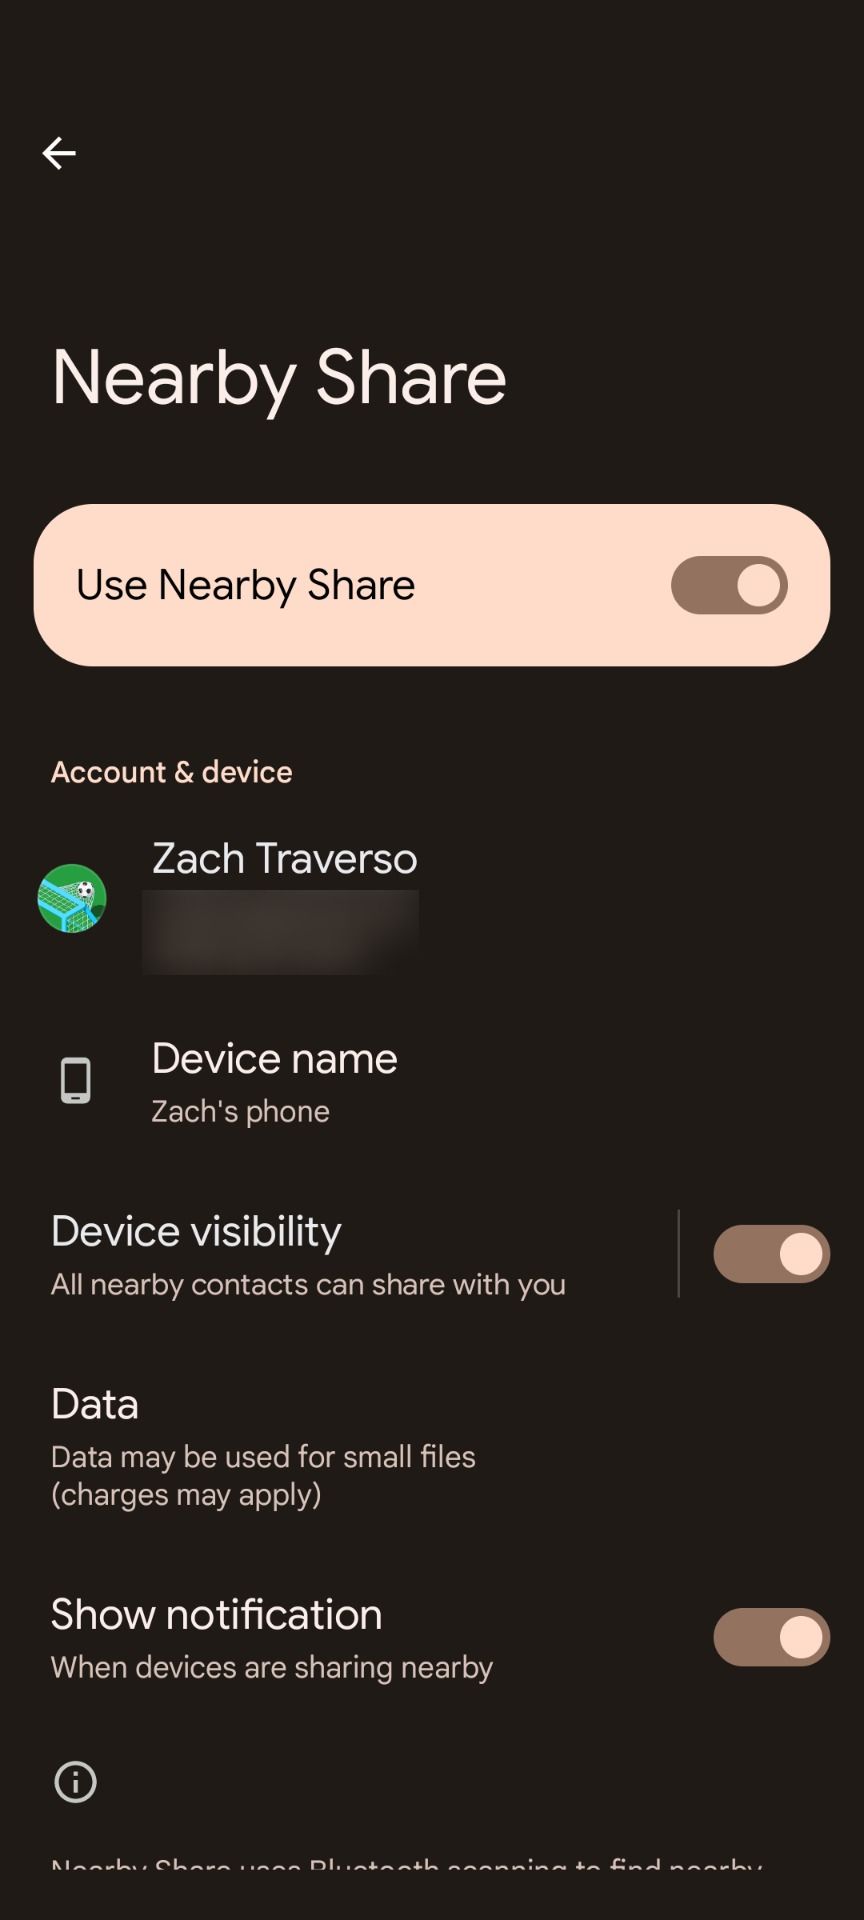 The Nearby Share settings accessed through the Files by Google app